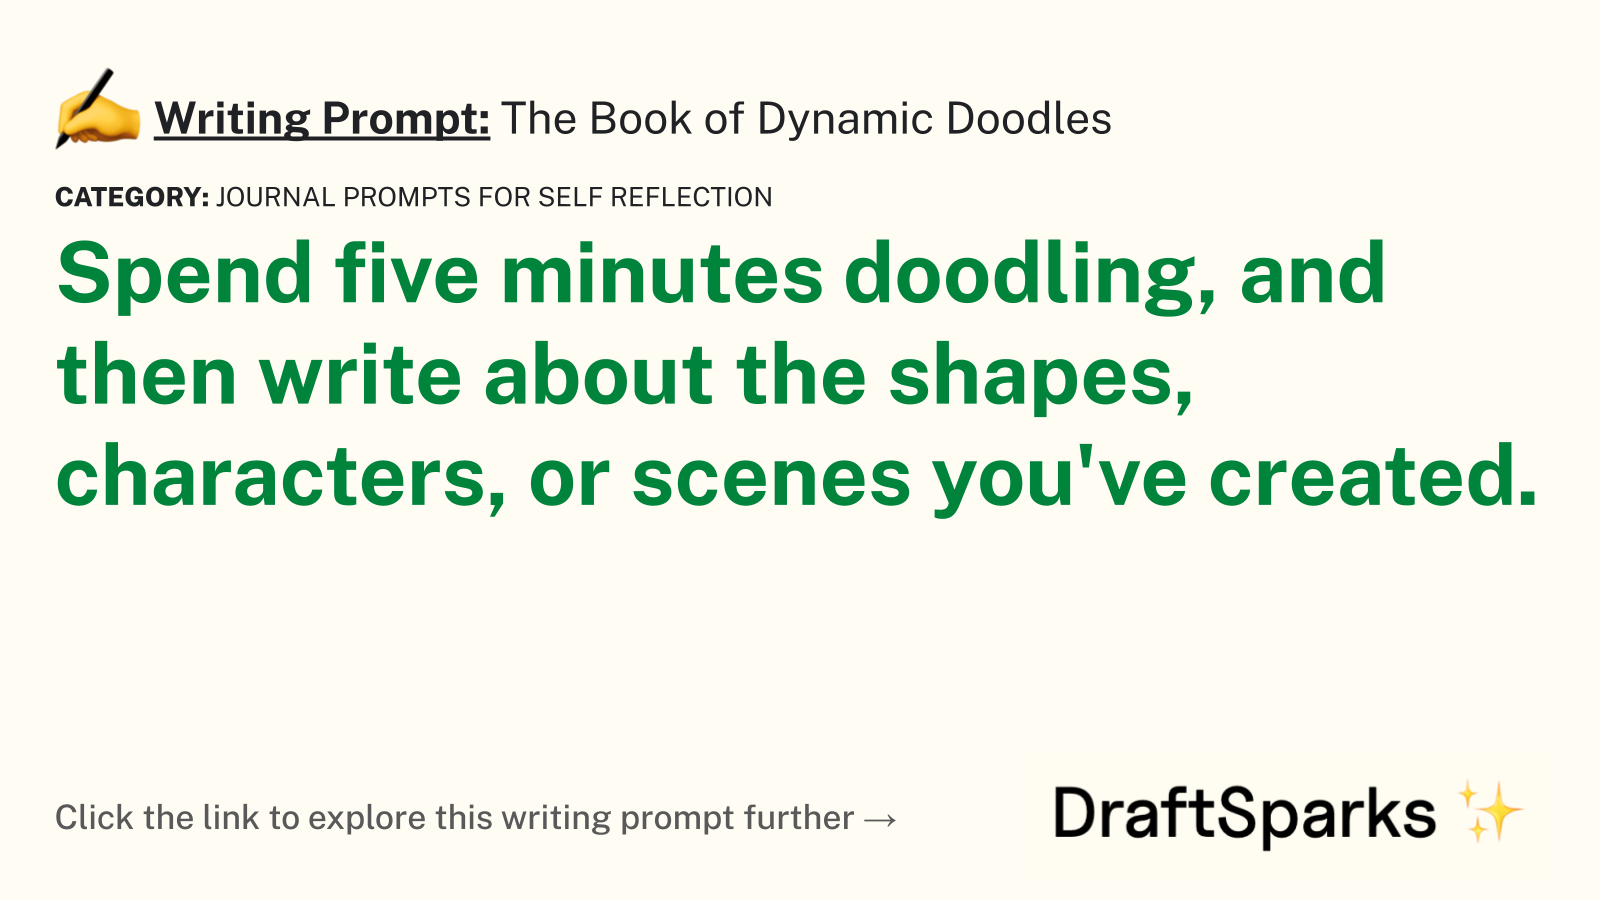 The Book of Dynamic Doodles